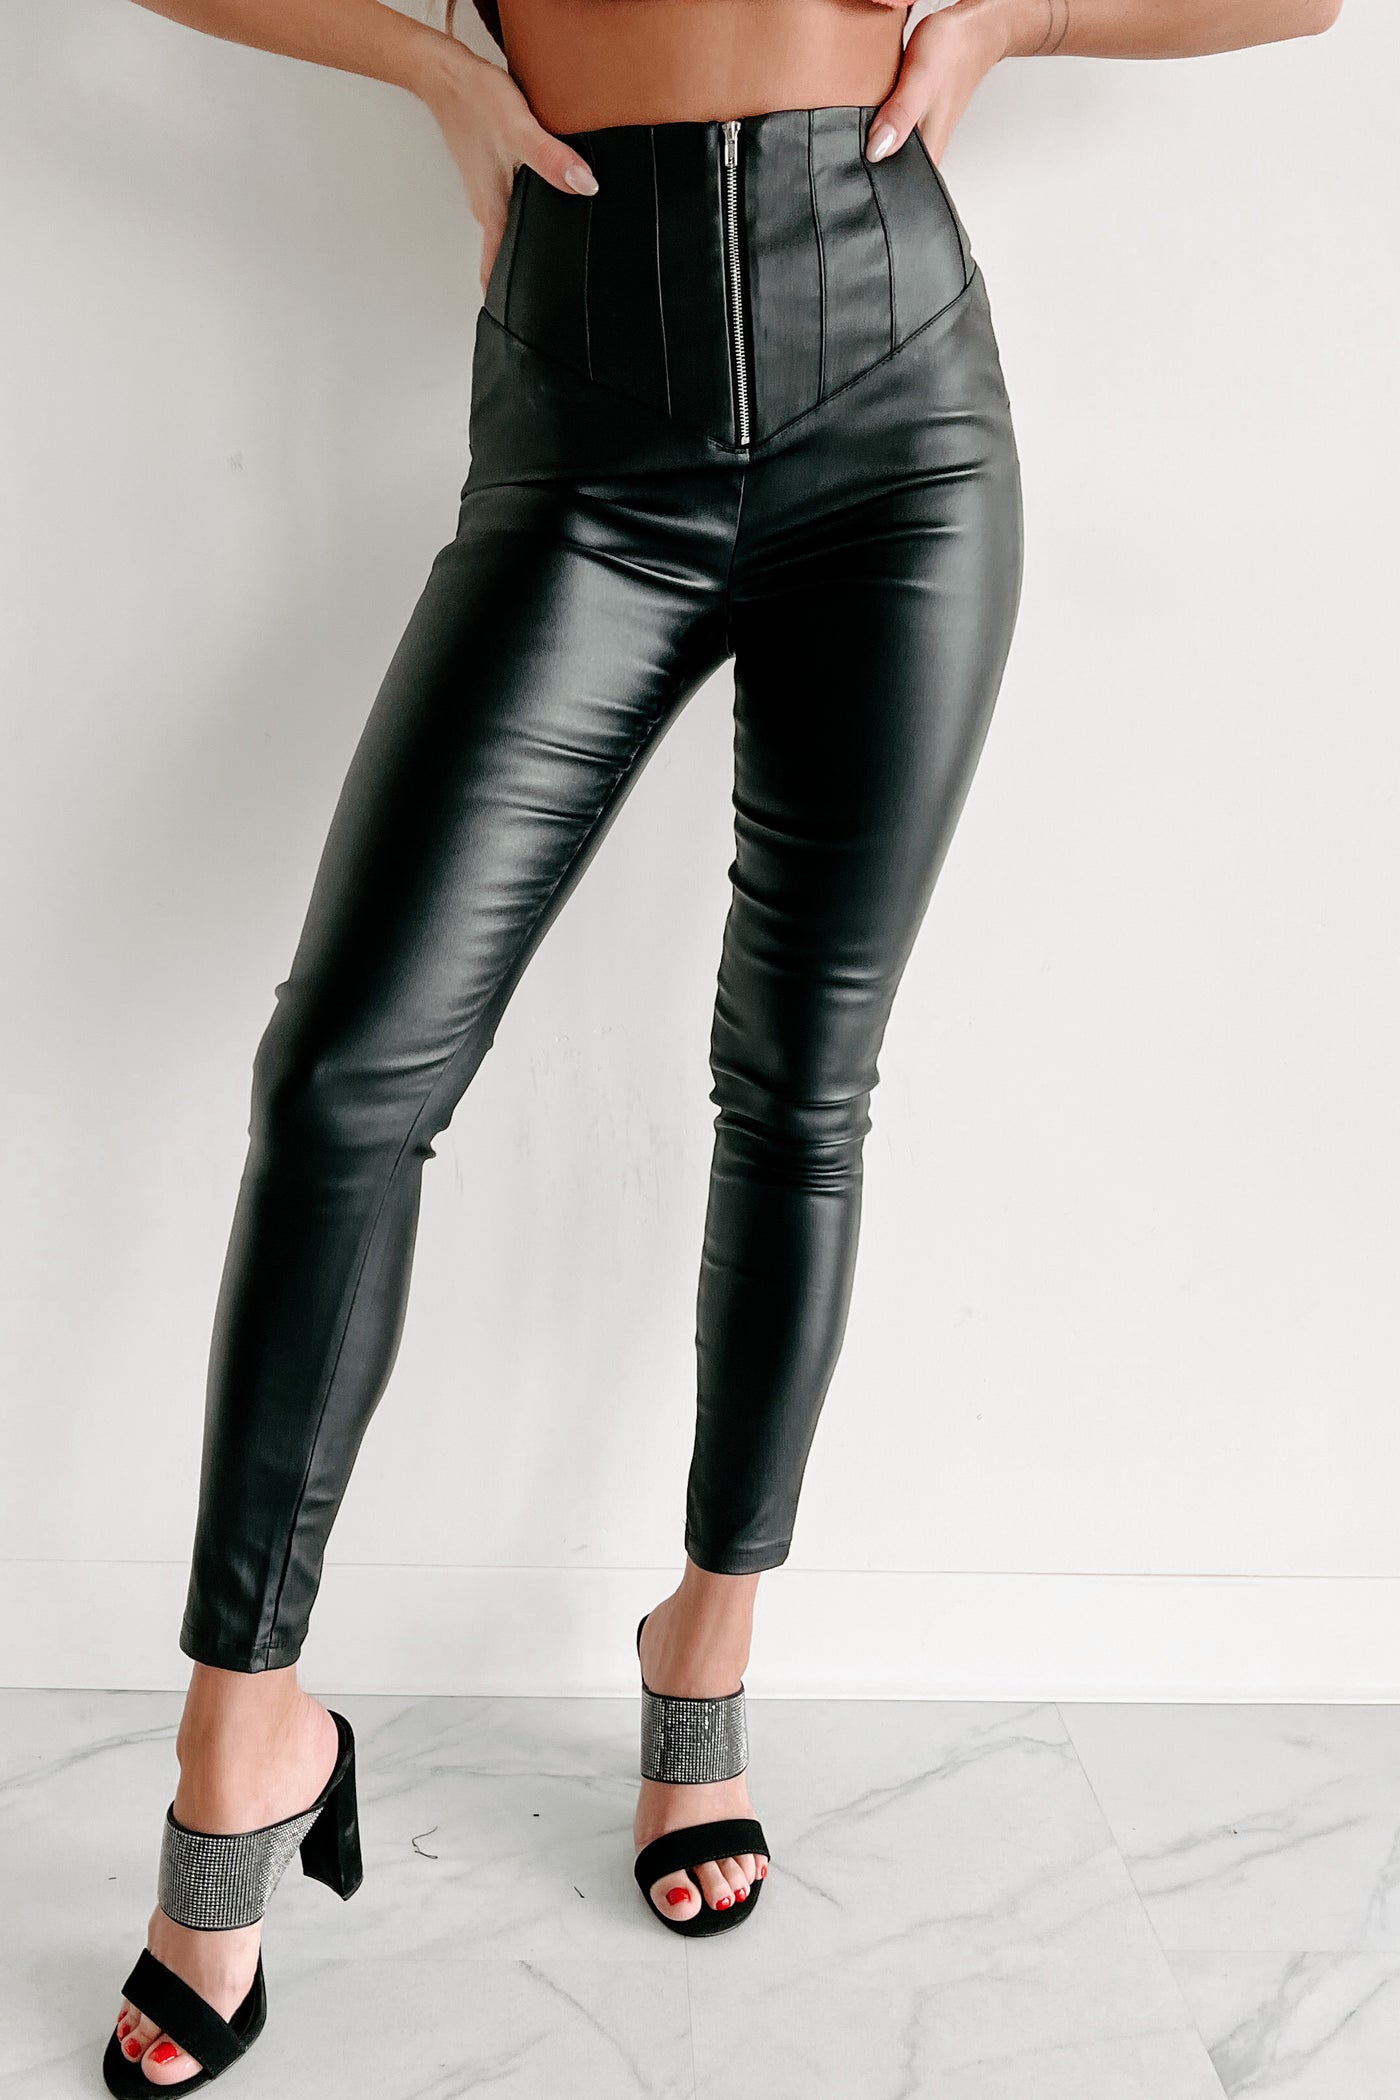 Black Faux Leather Pants/ High Waisted Women Leather Pants